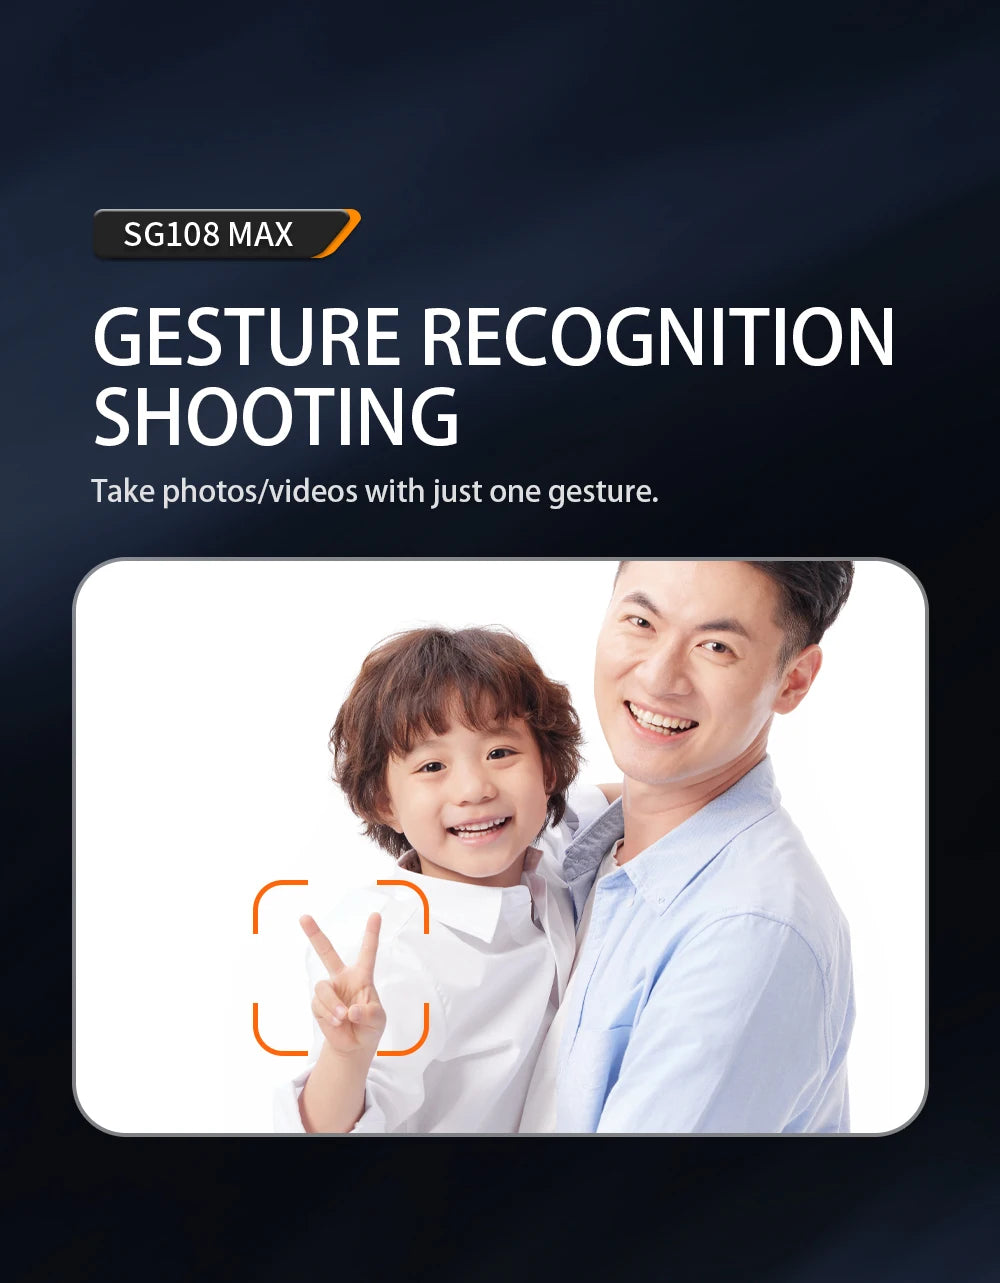 G108 Pro MAx Drone, SG108 MAX GESTURE RECOGNITION SHOOTING Take photos/